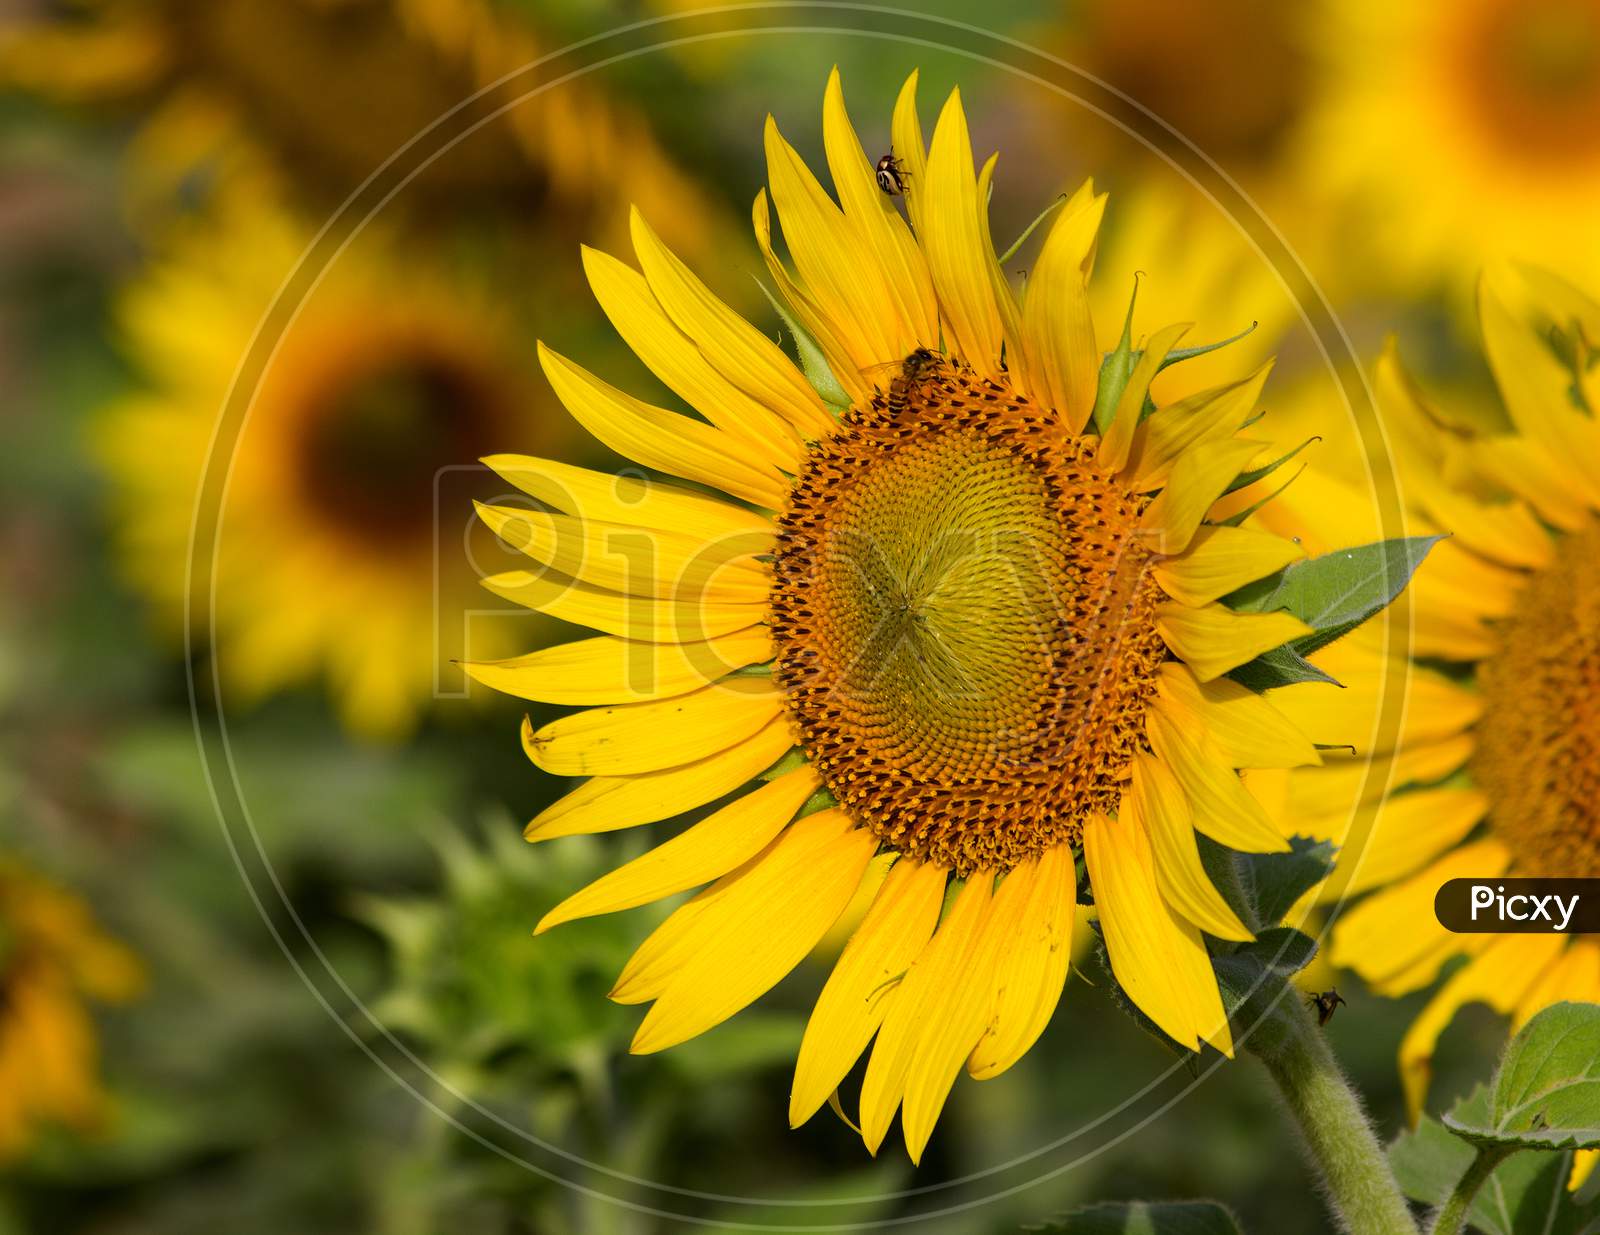 Macro Shot of Sunflower With Petals And Patterns Forming a Background